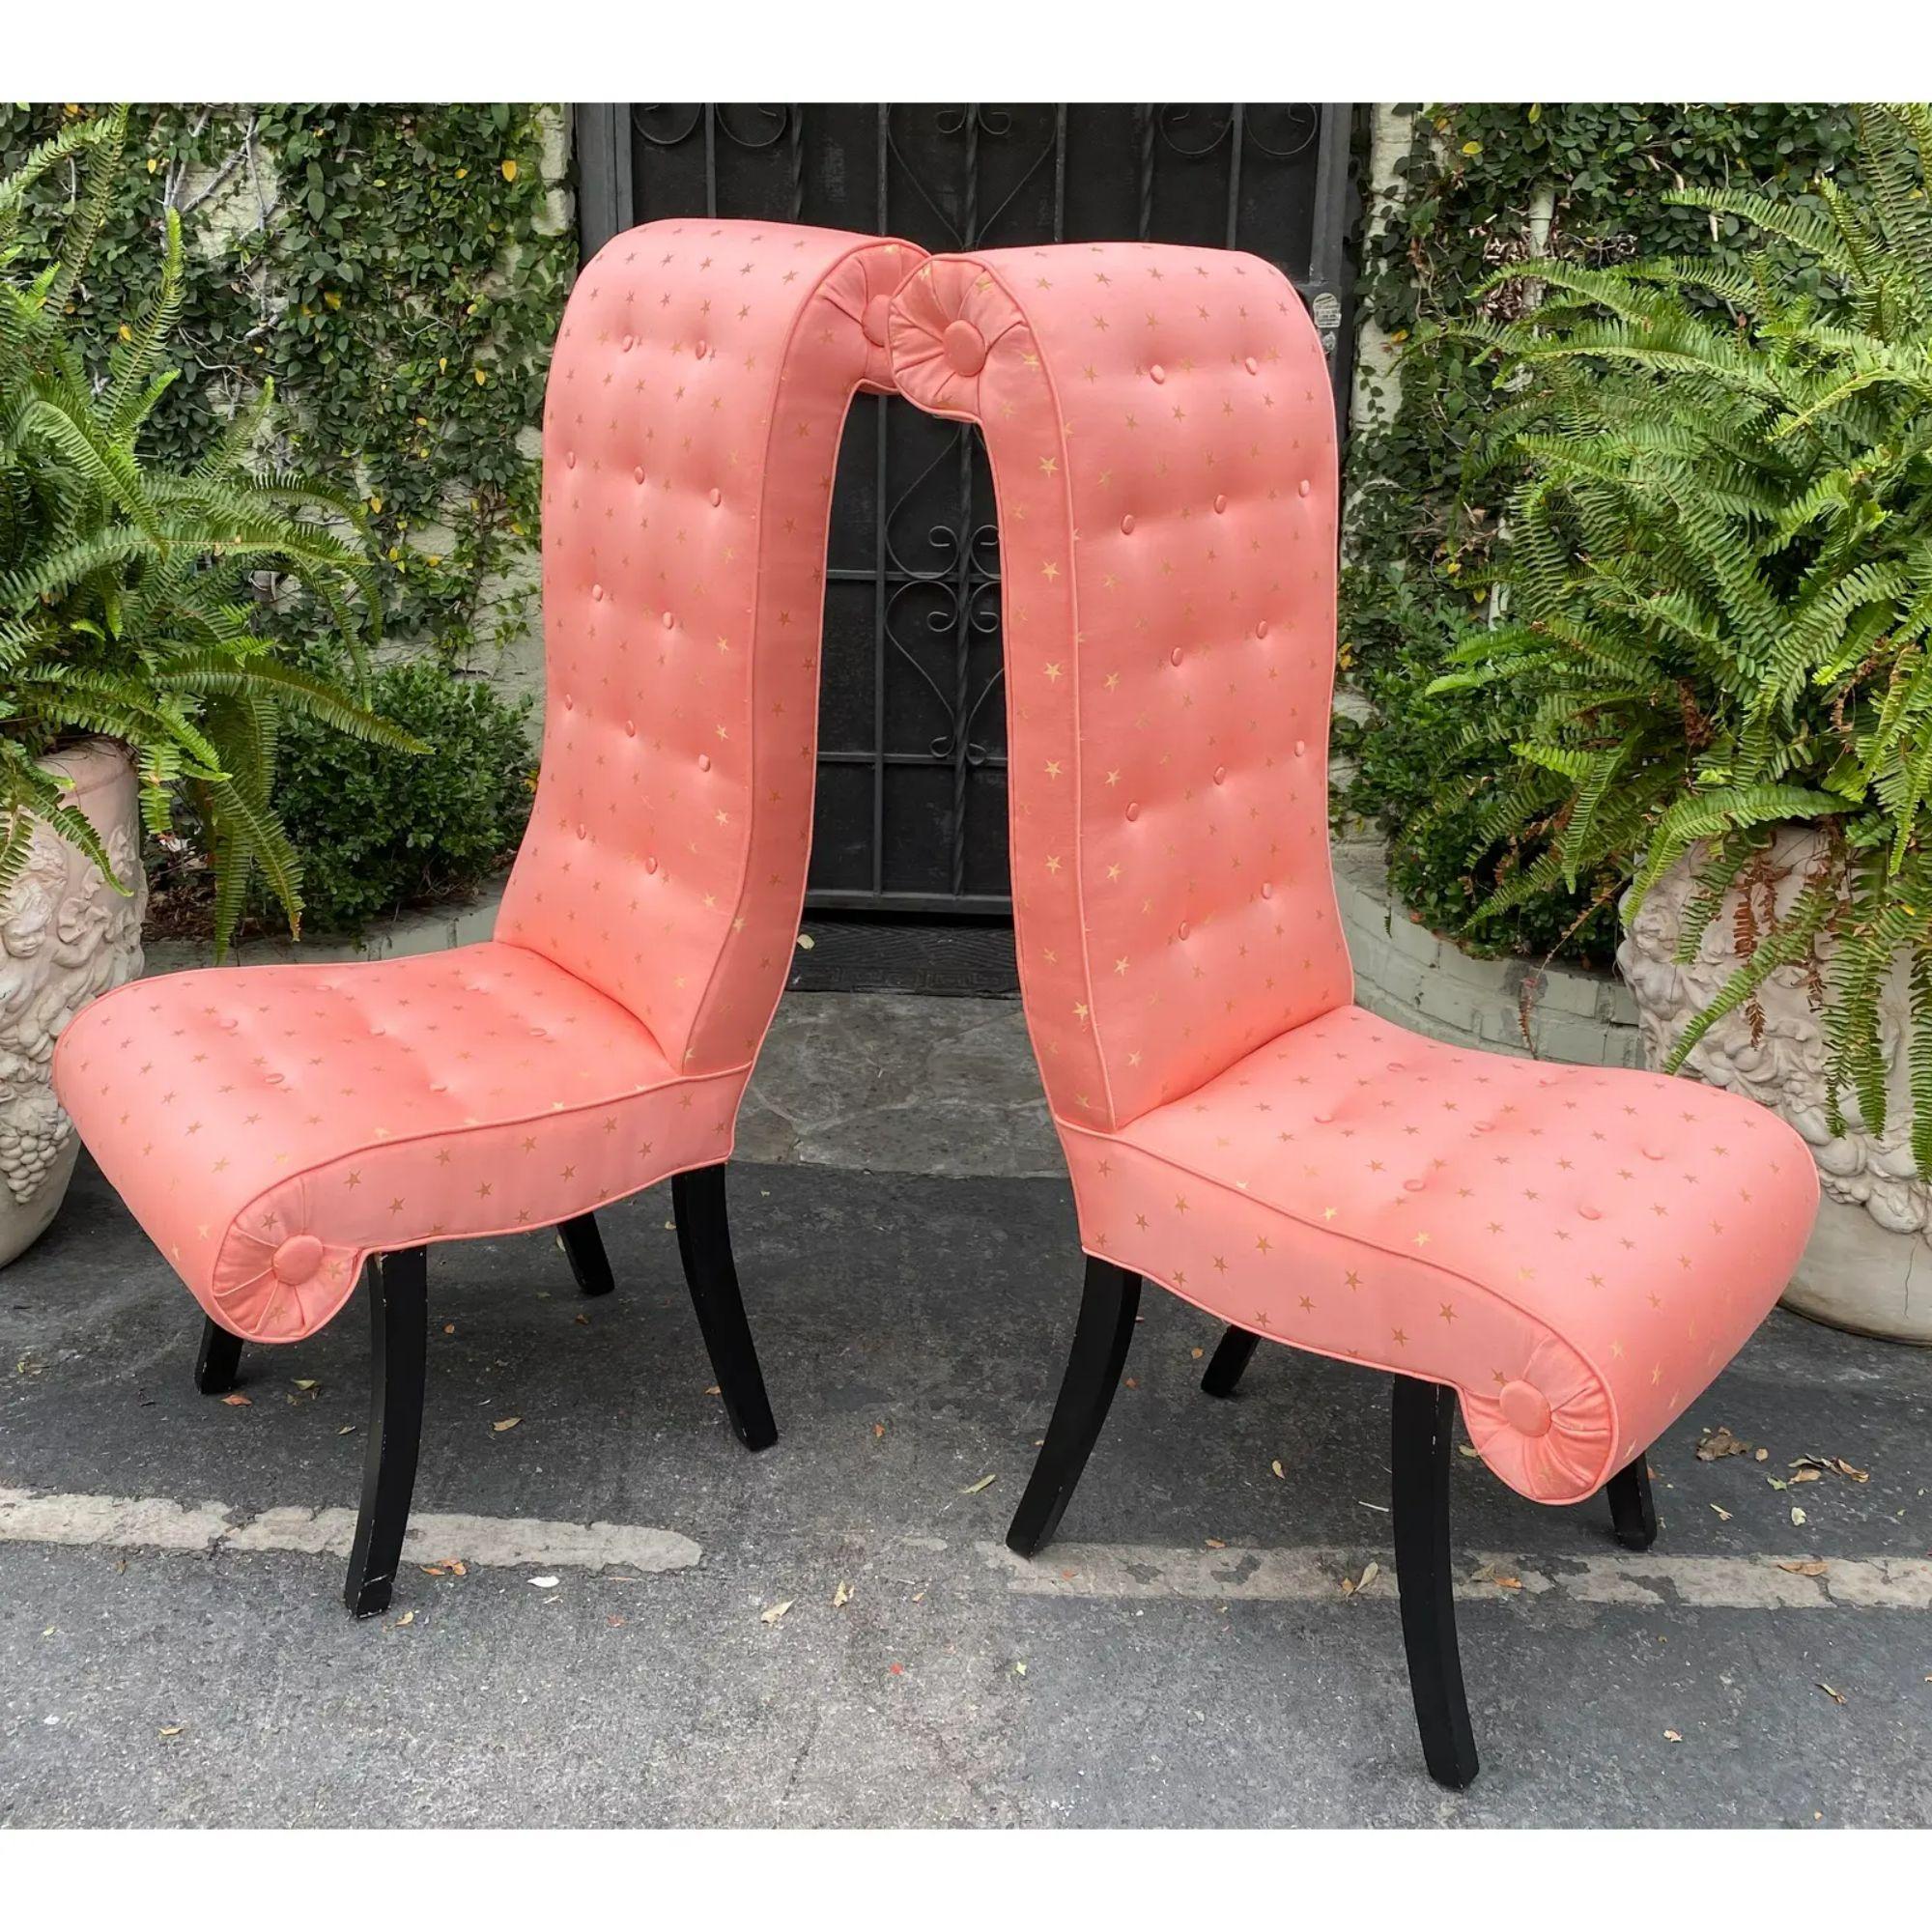 20th Century Pair of Mid-Century Hollywood Regency Scroll Back Chairs with Scalamandre Fabric For Sale